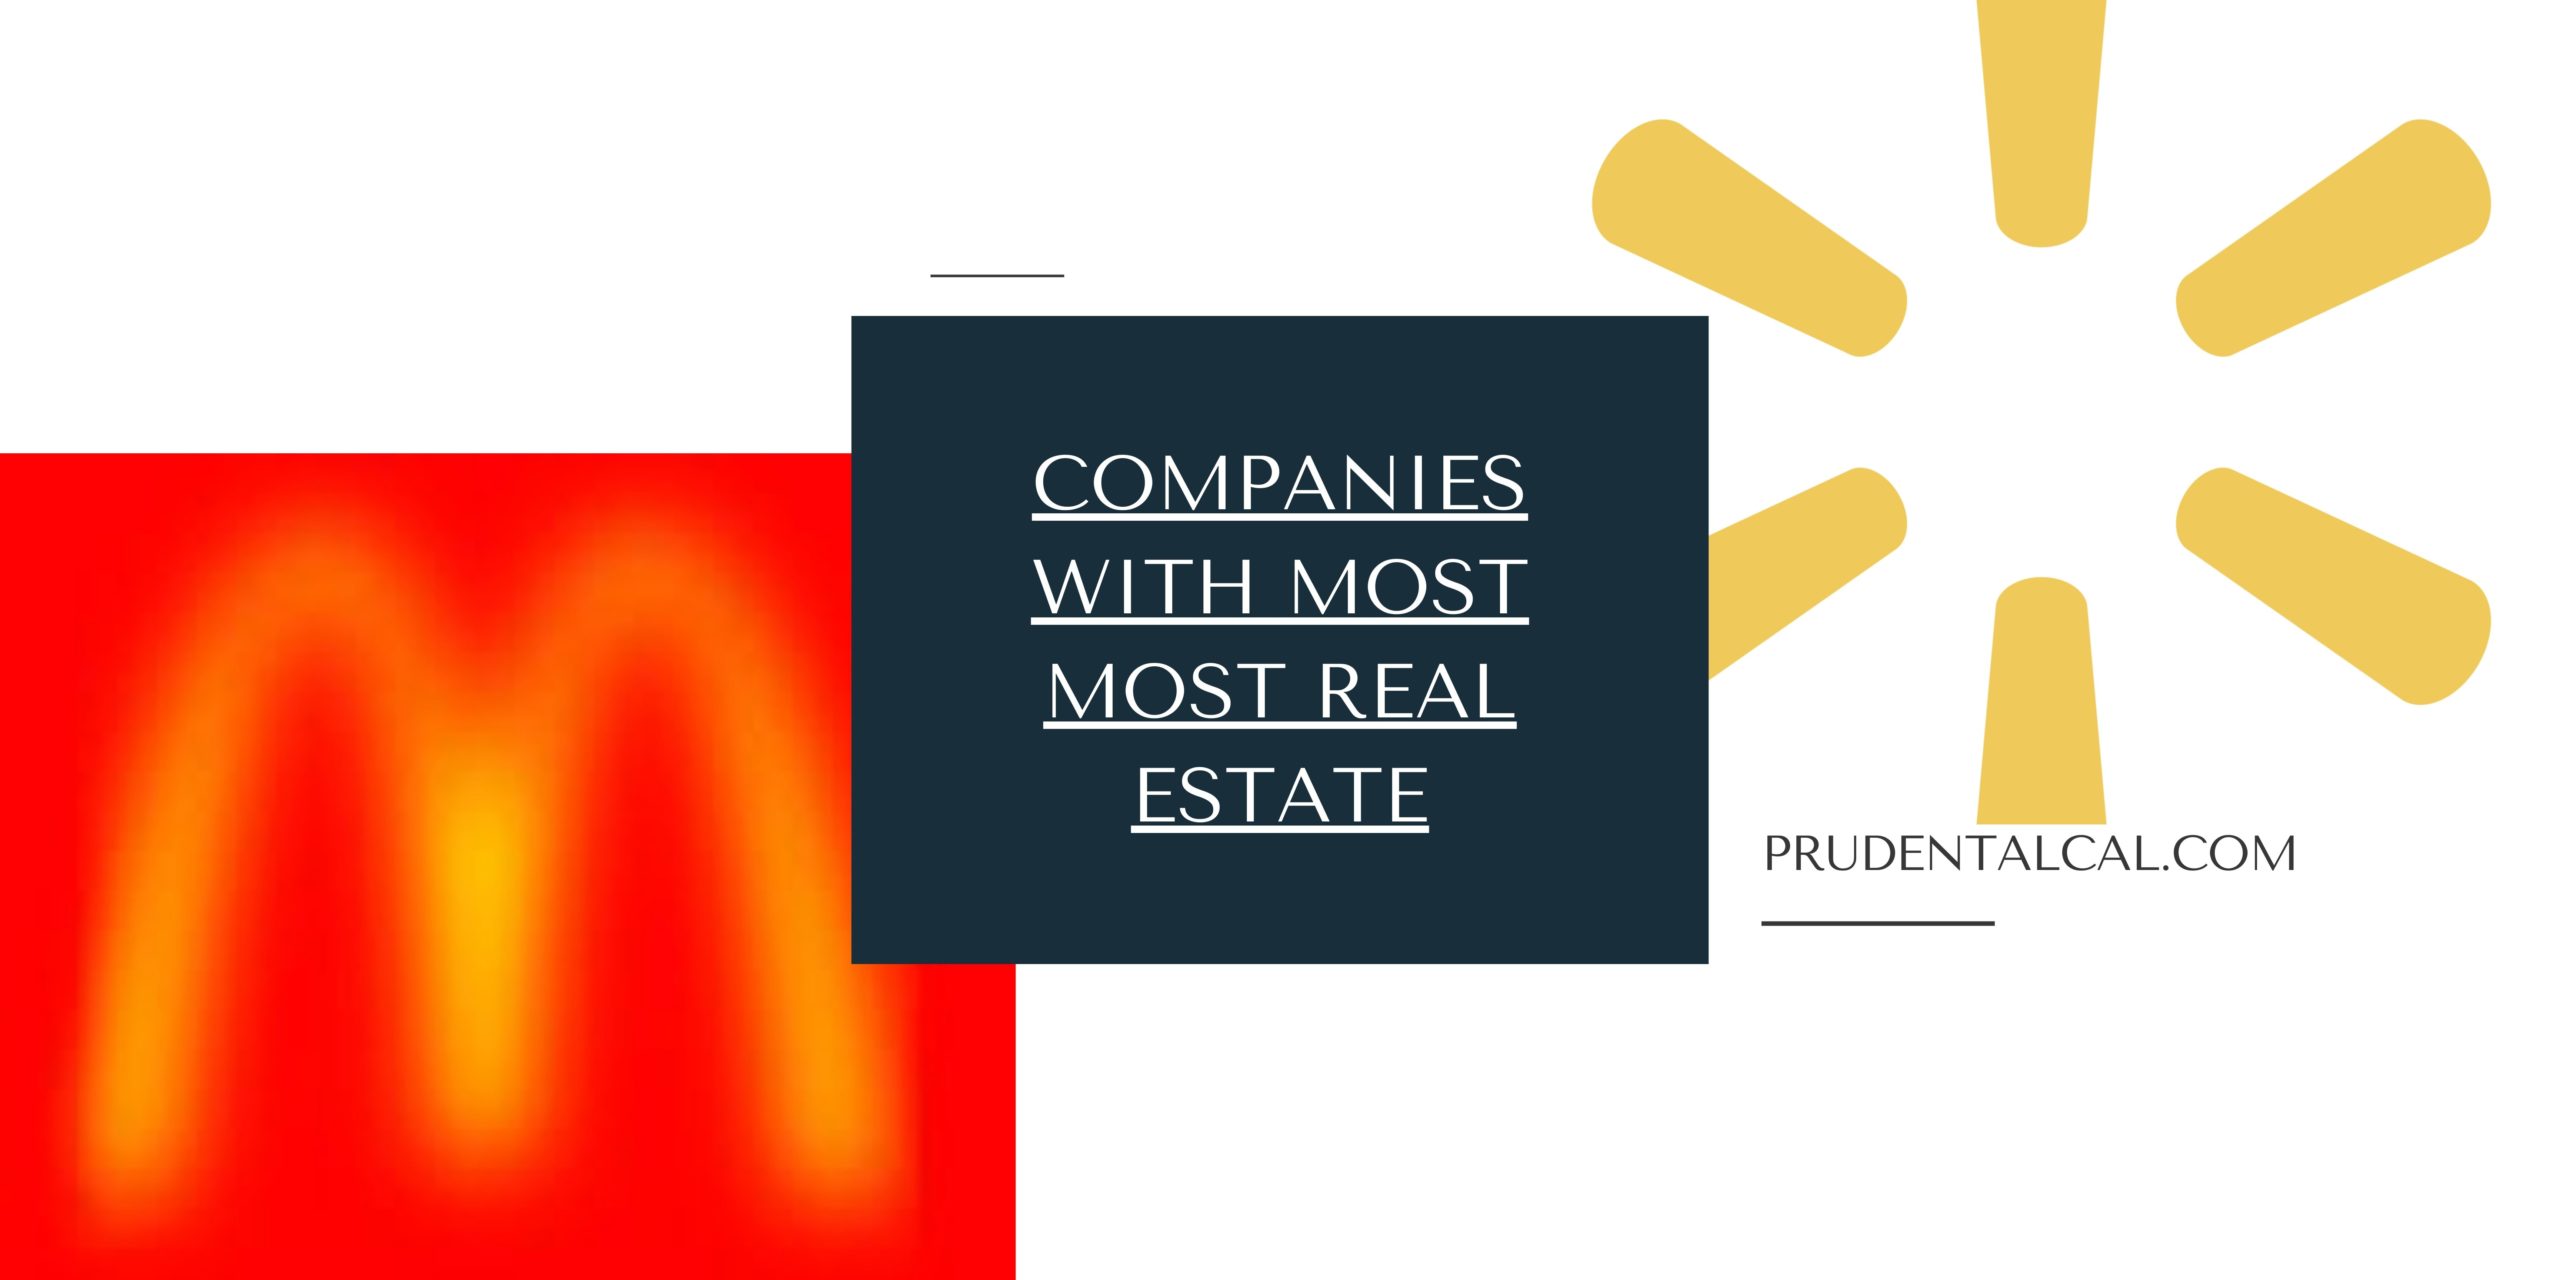 What Company Owns The Most Real Estate?